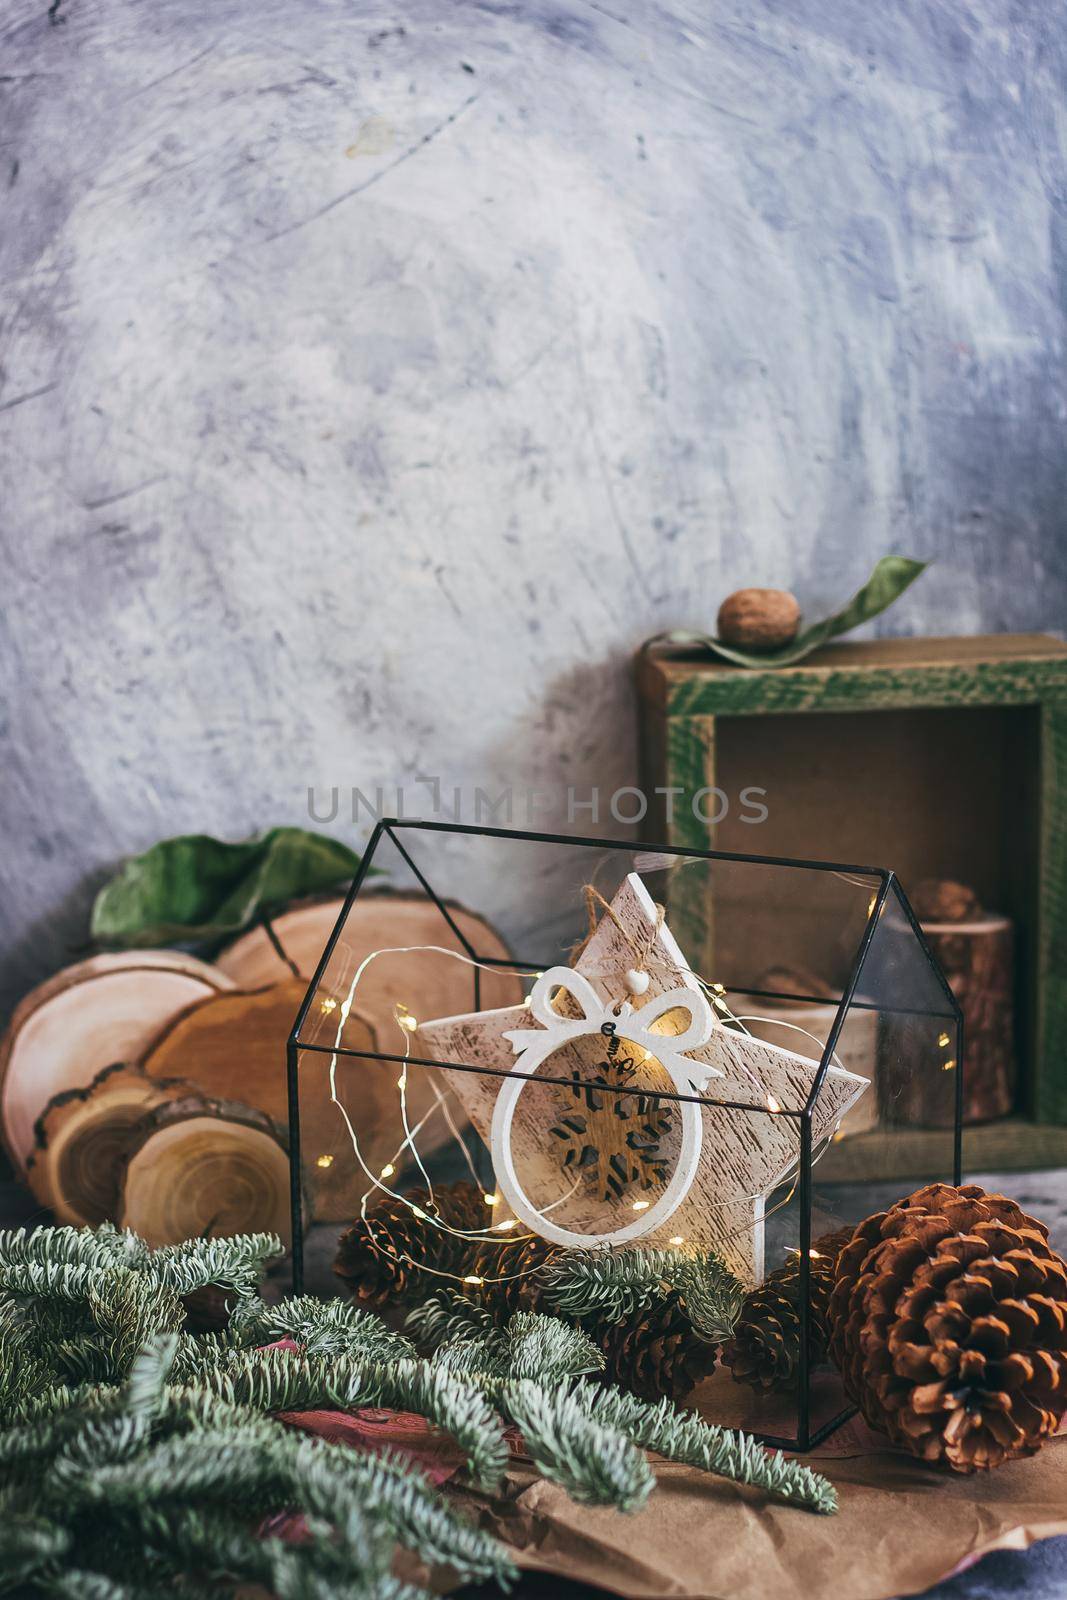 Christmas composition with nuts, garland, star, wooden decor rustic wooden box and fir tree branch. Rustic style. by mmp1206